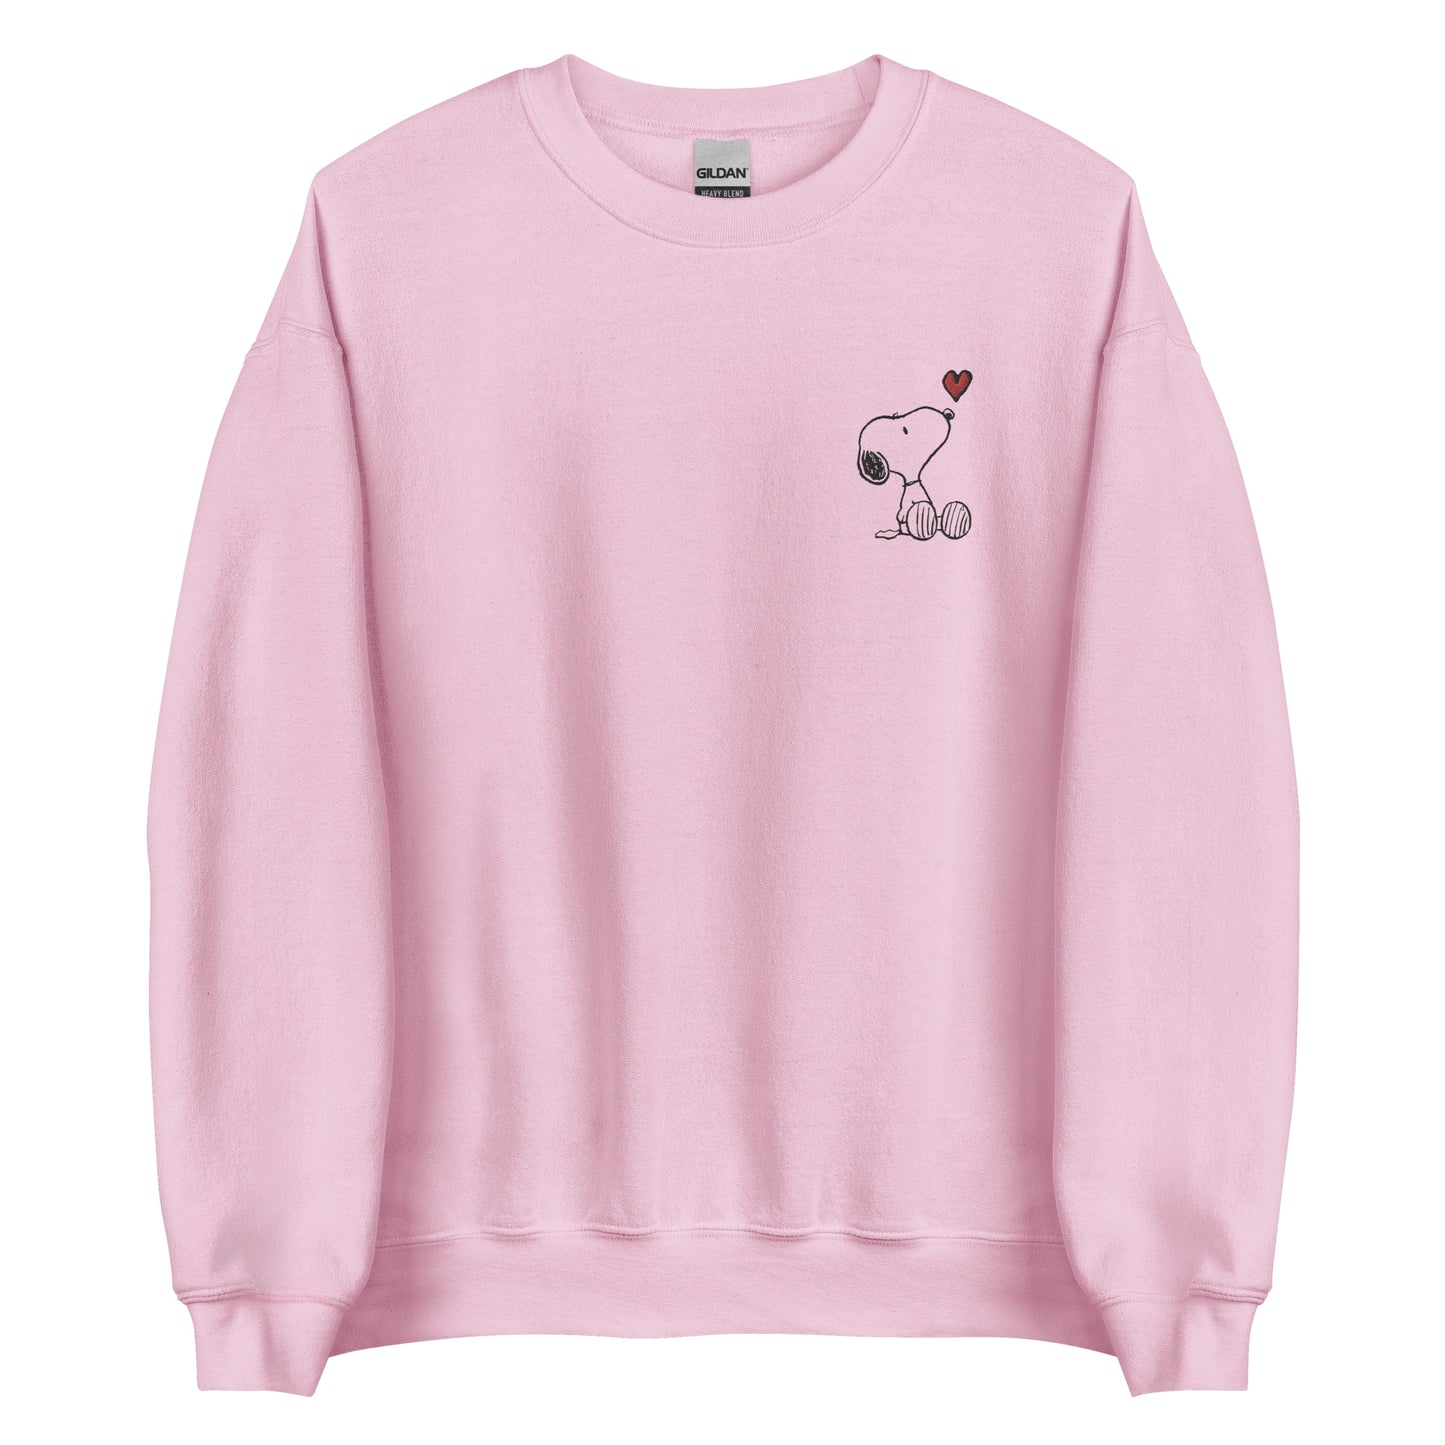 Snoopy Heart Embroidered Adult Crewneck